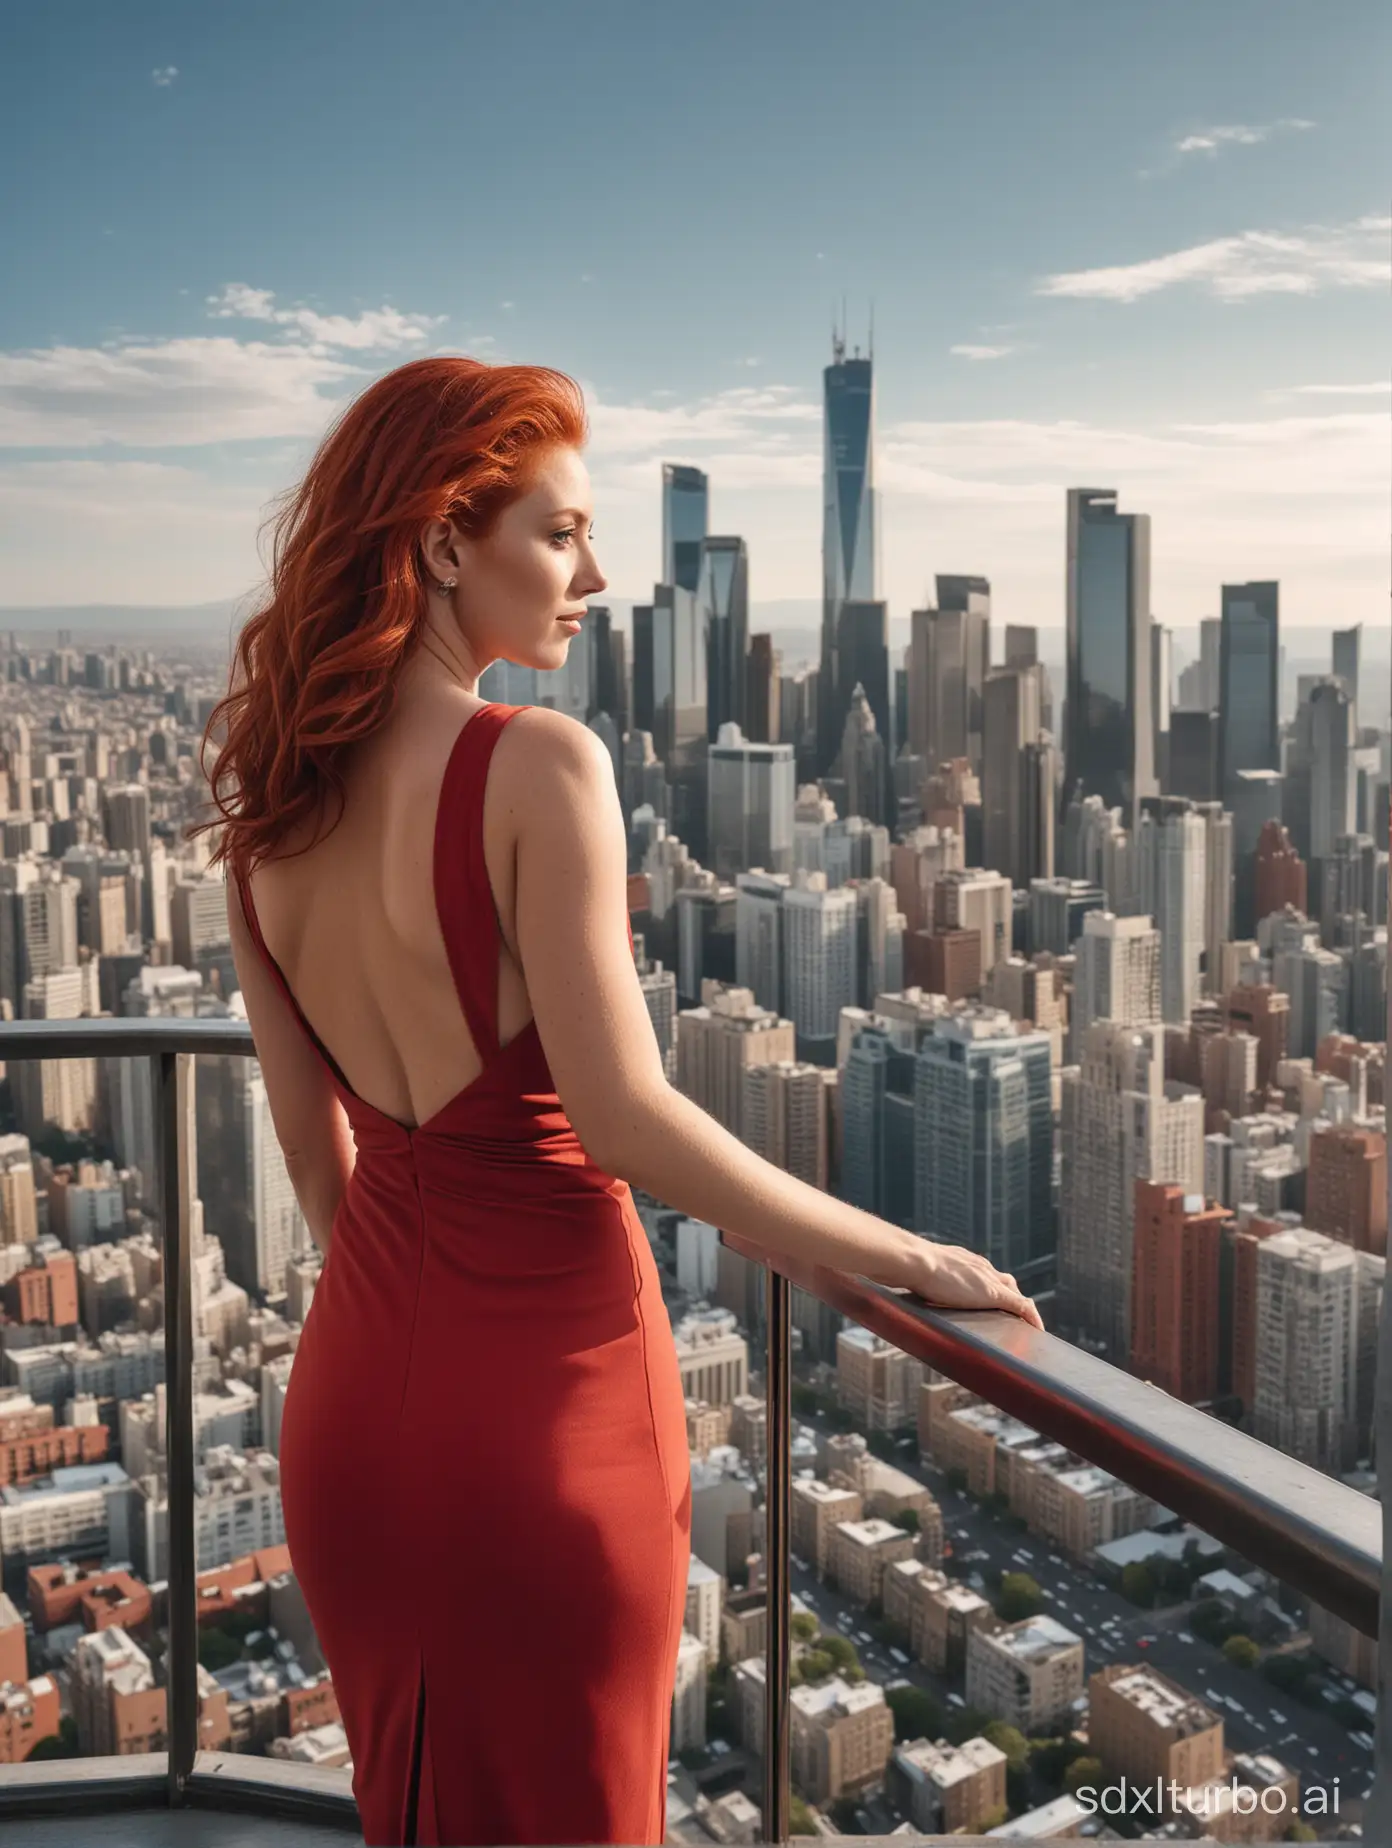 Elegant-Woman-with-Vibrant-Red-Hair-overlooking-Cityscape